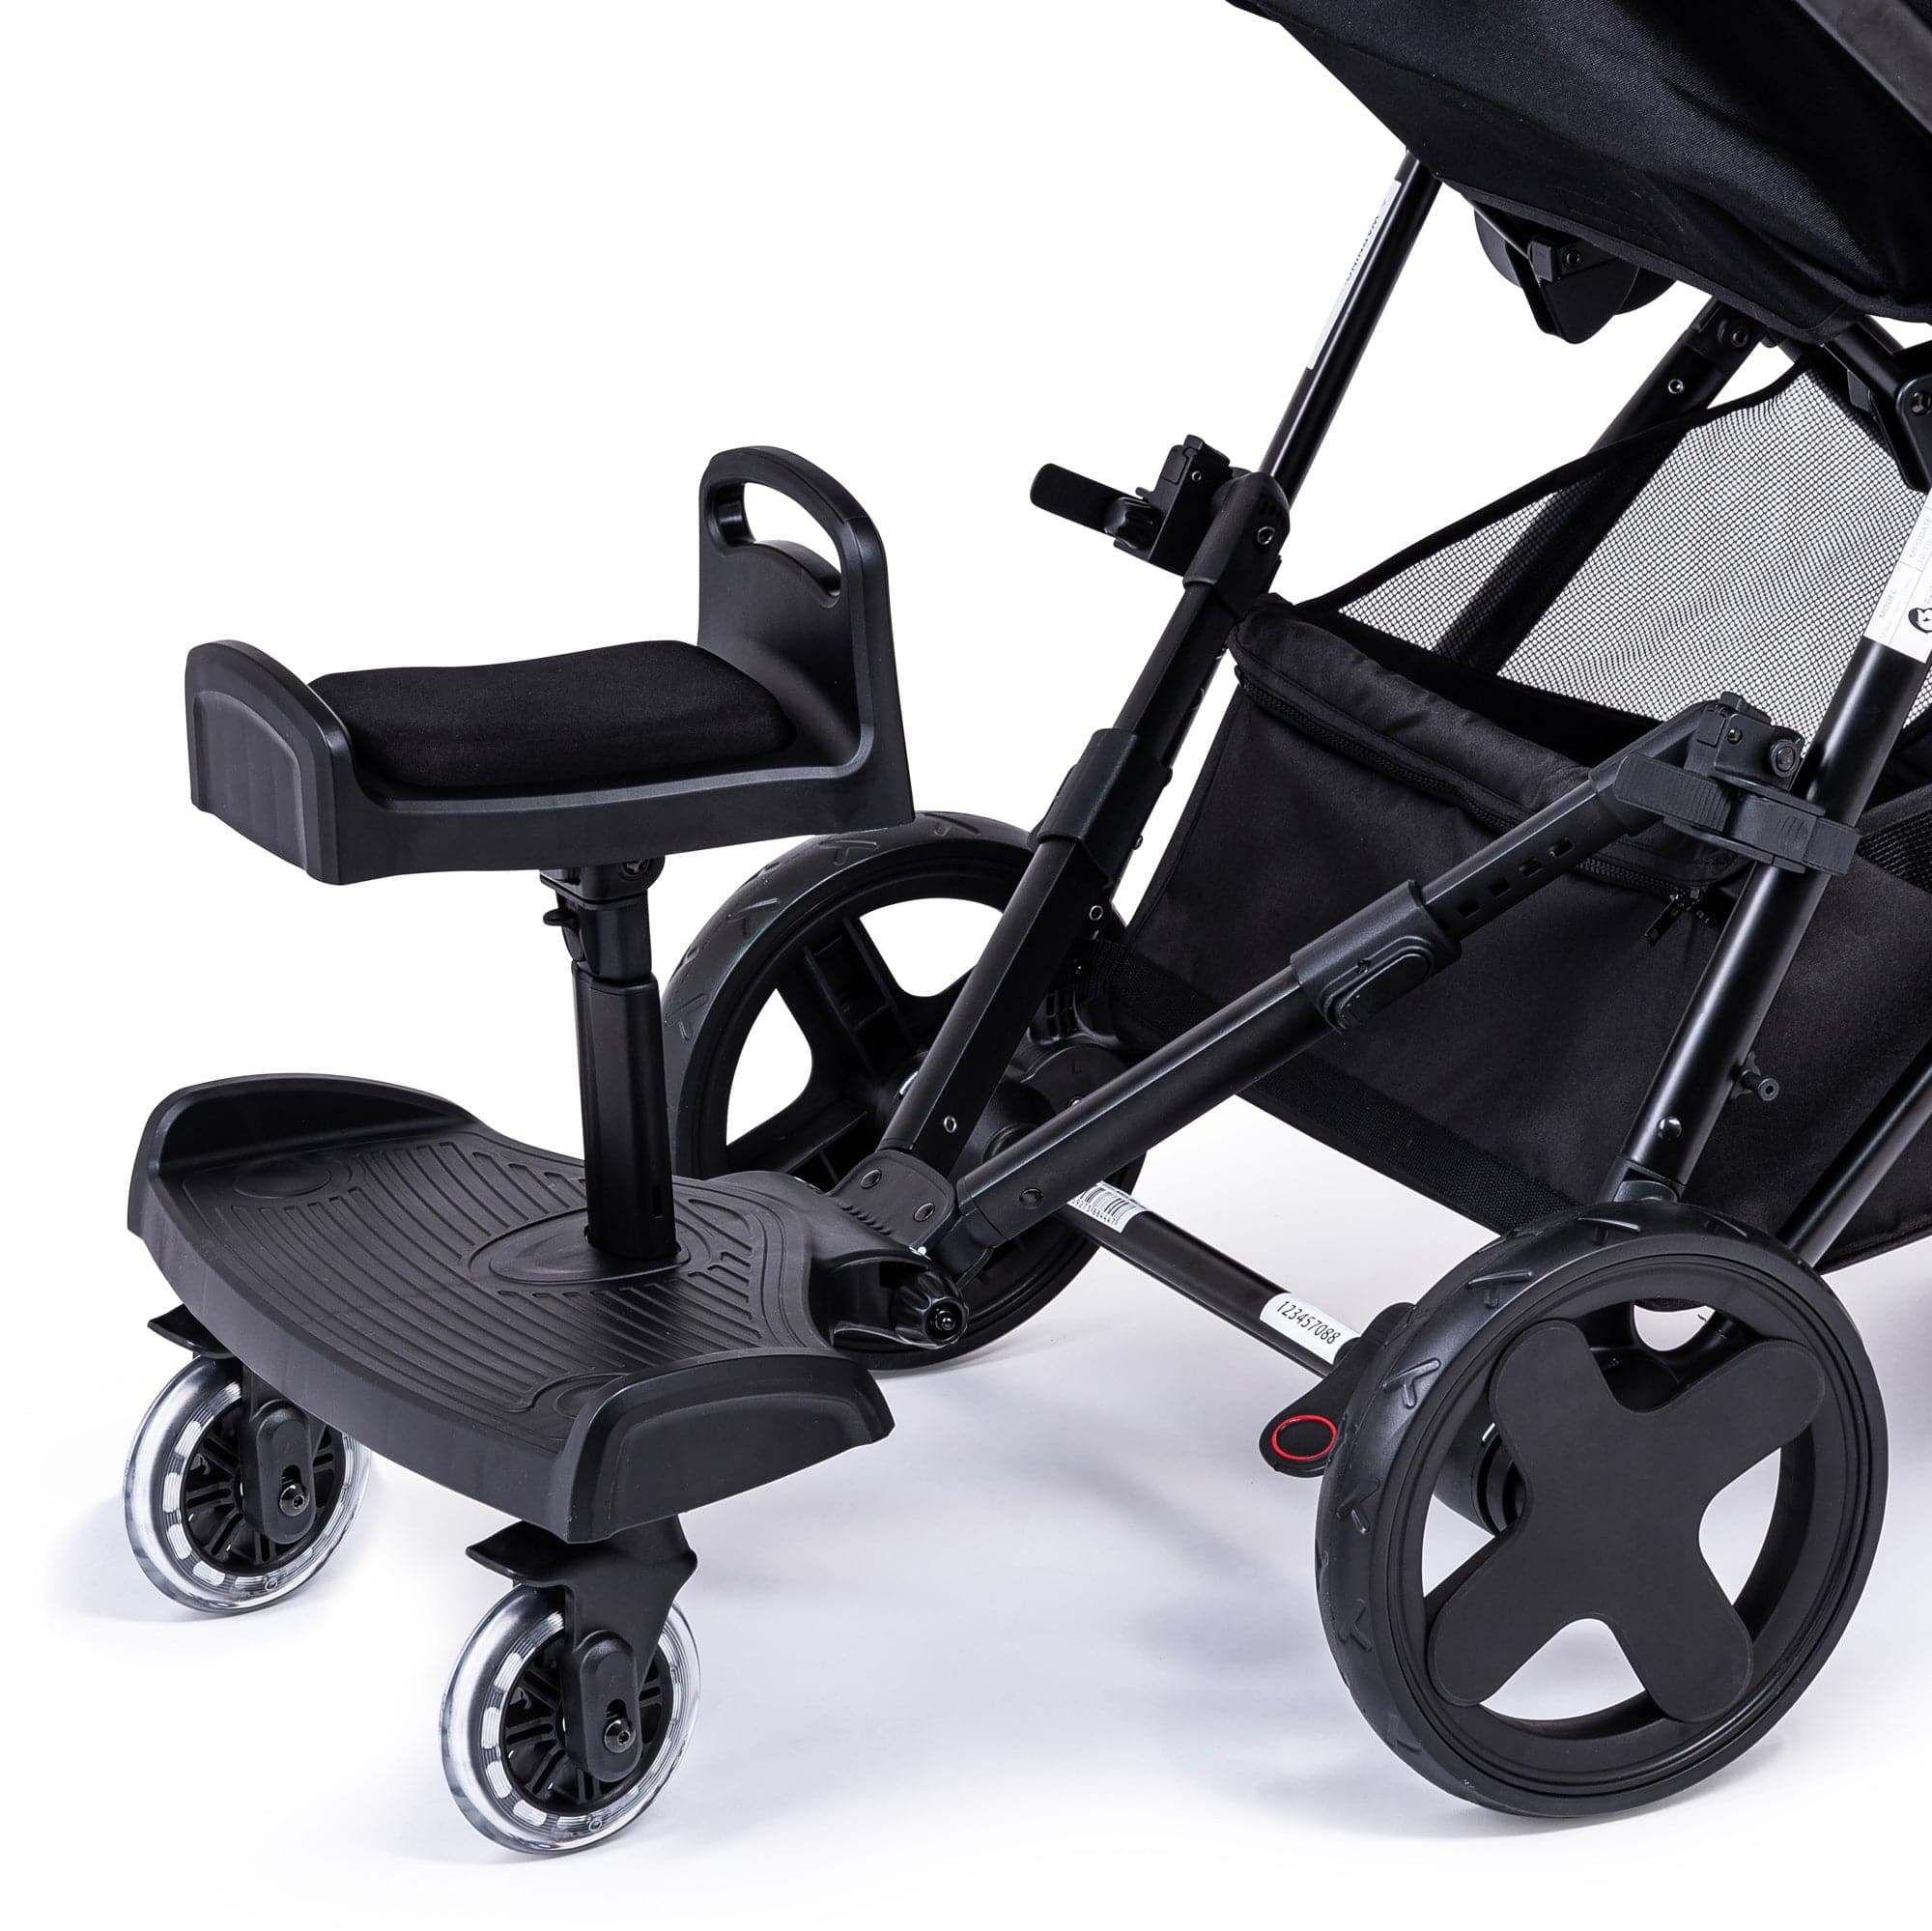 Ride On Board with Seat Compatible with Bumbleride - For Your Little One